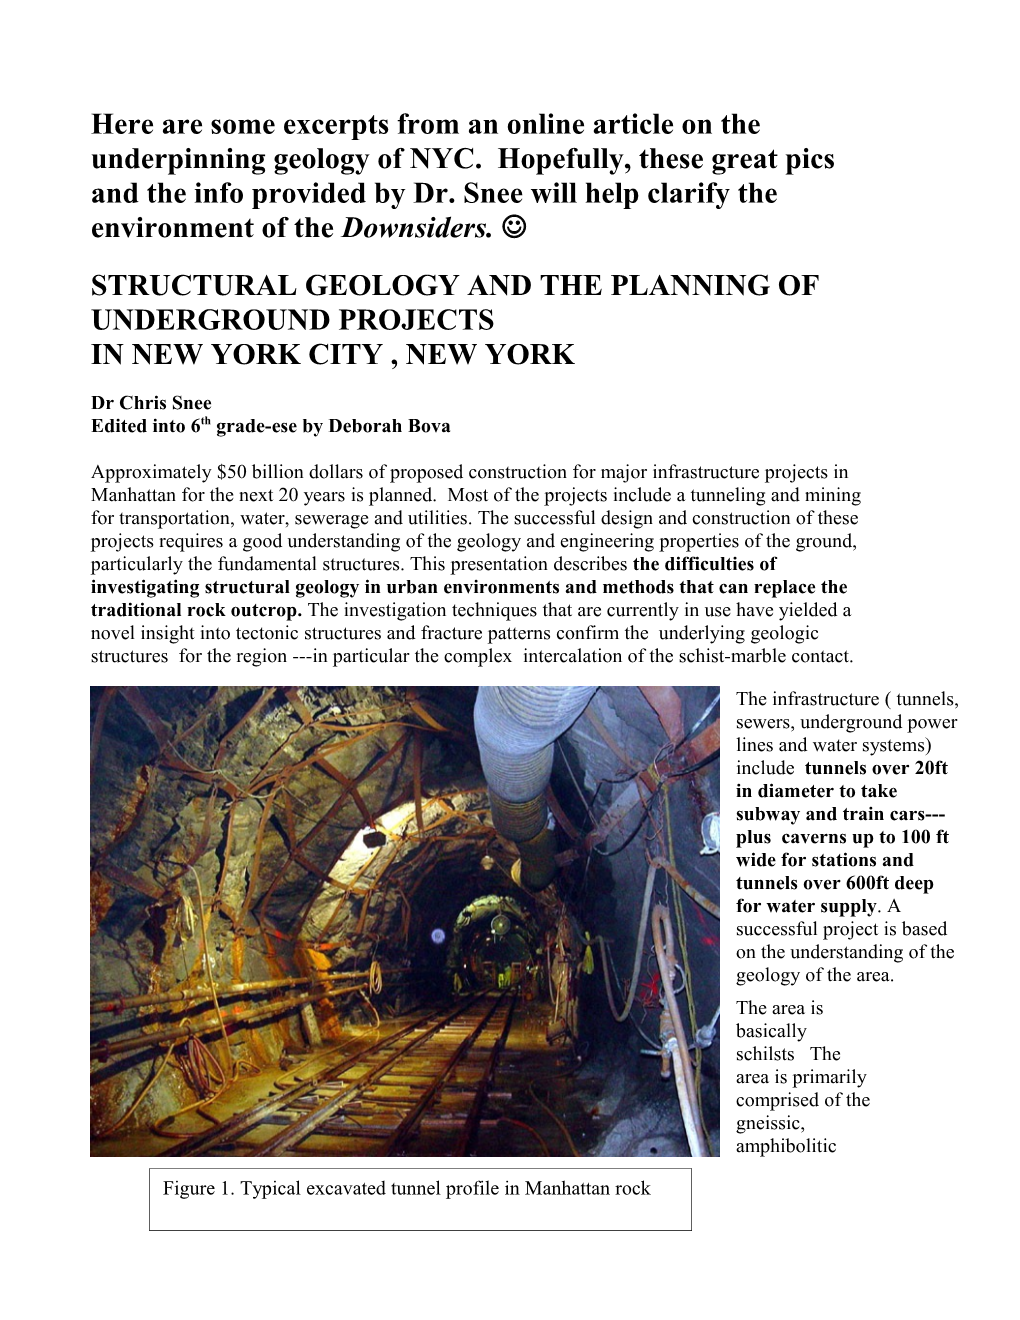 Here Are Some Excerpts from an Online Article on the Underpinning Geology of NYC